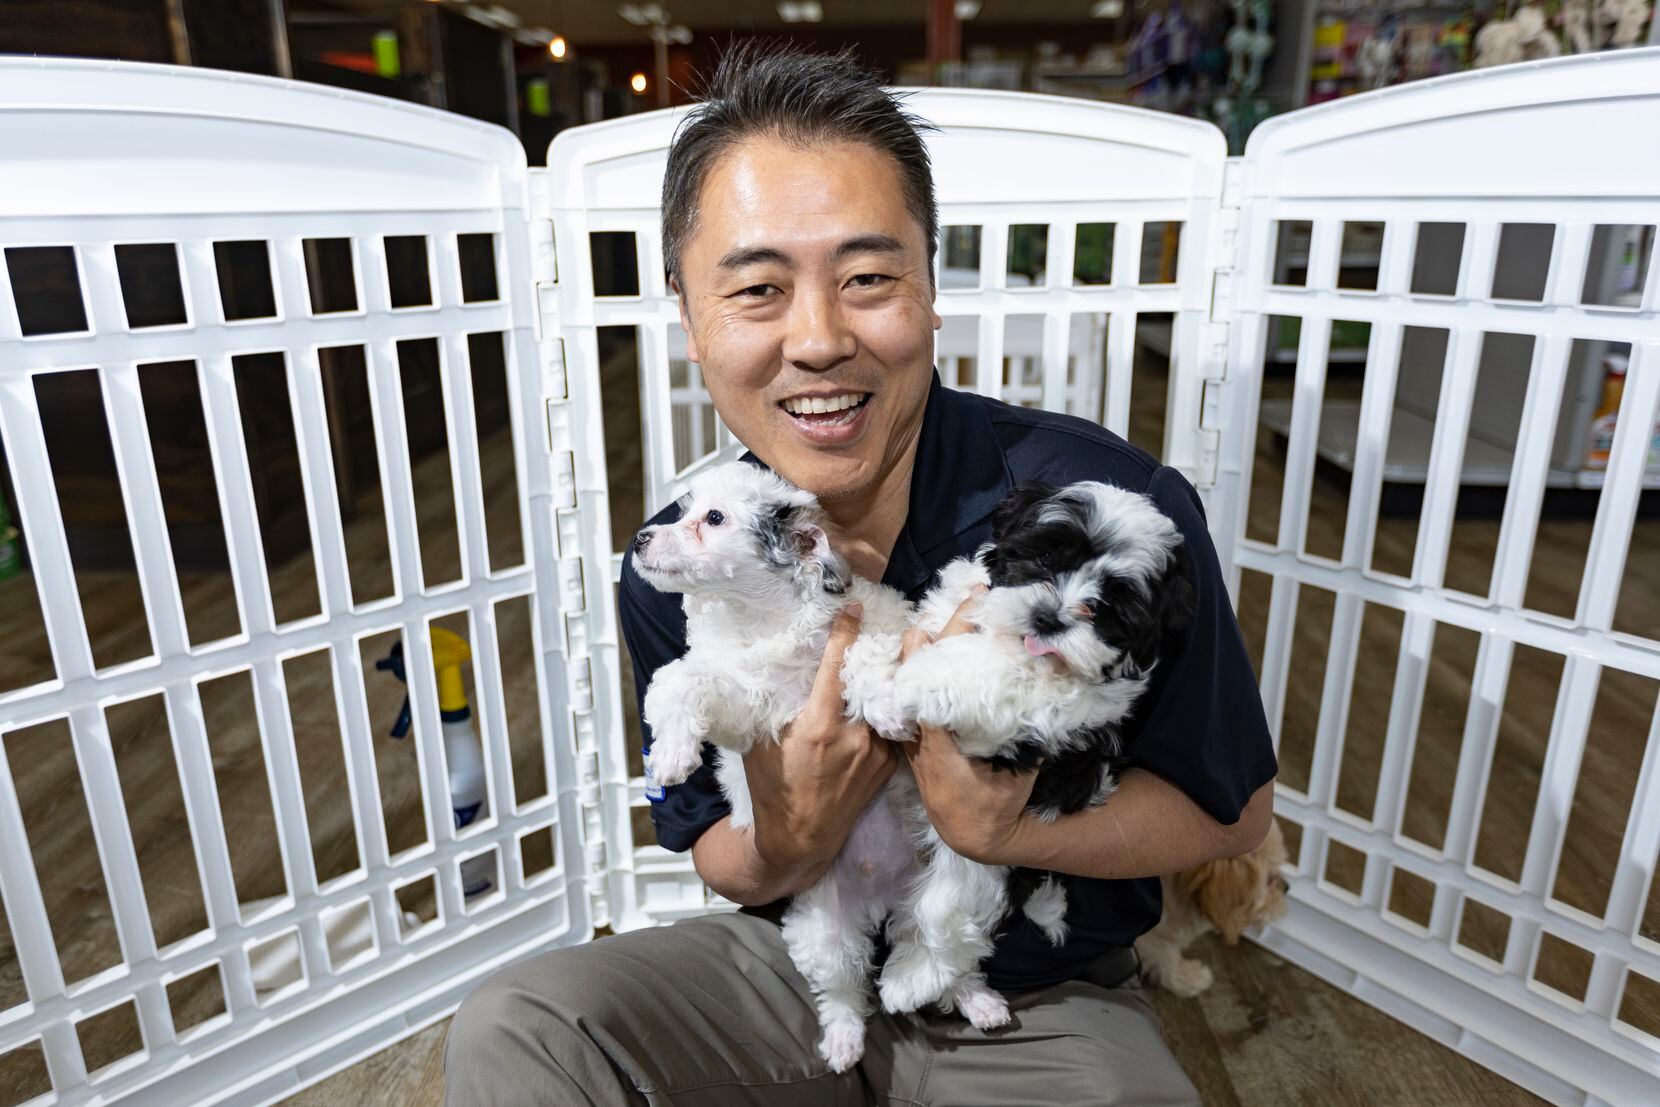 Petland owner Jay Suk with two puppies for sale at his store in Dallas.